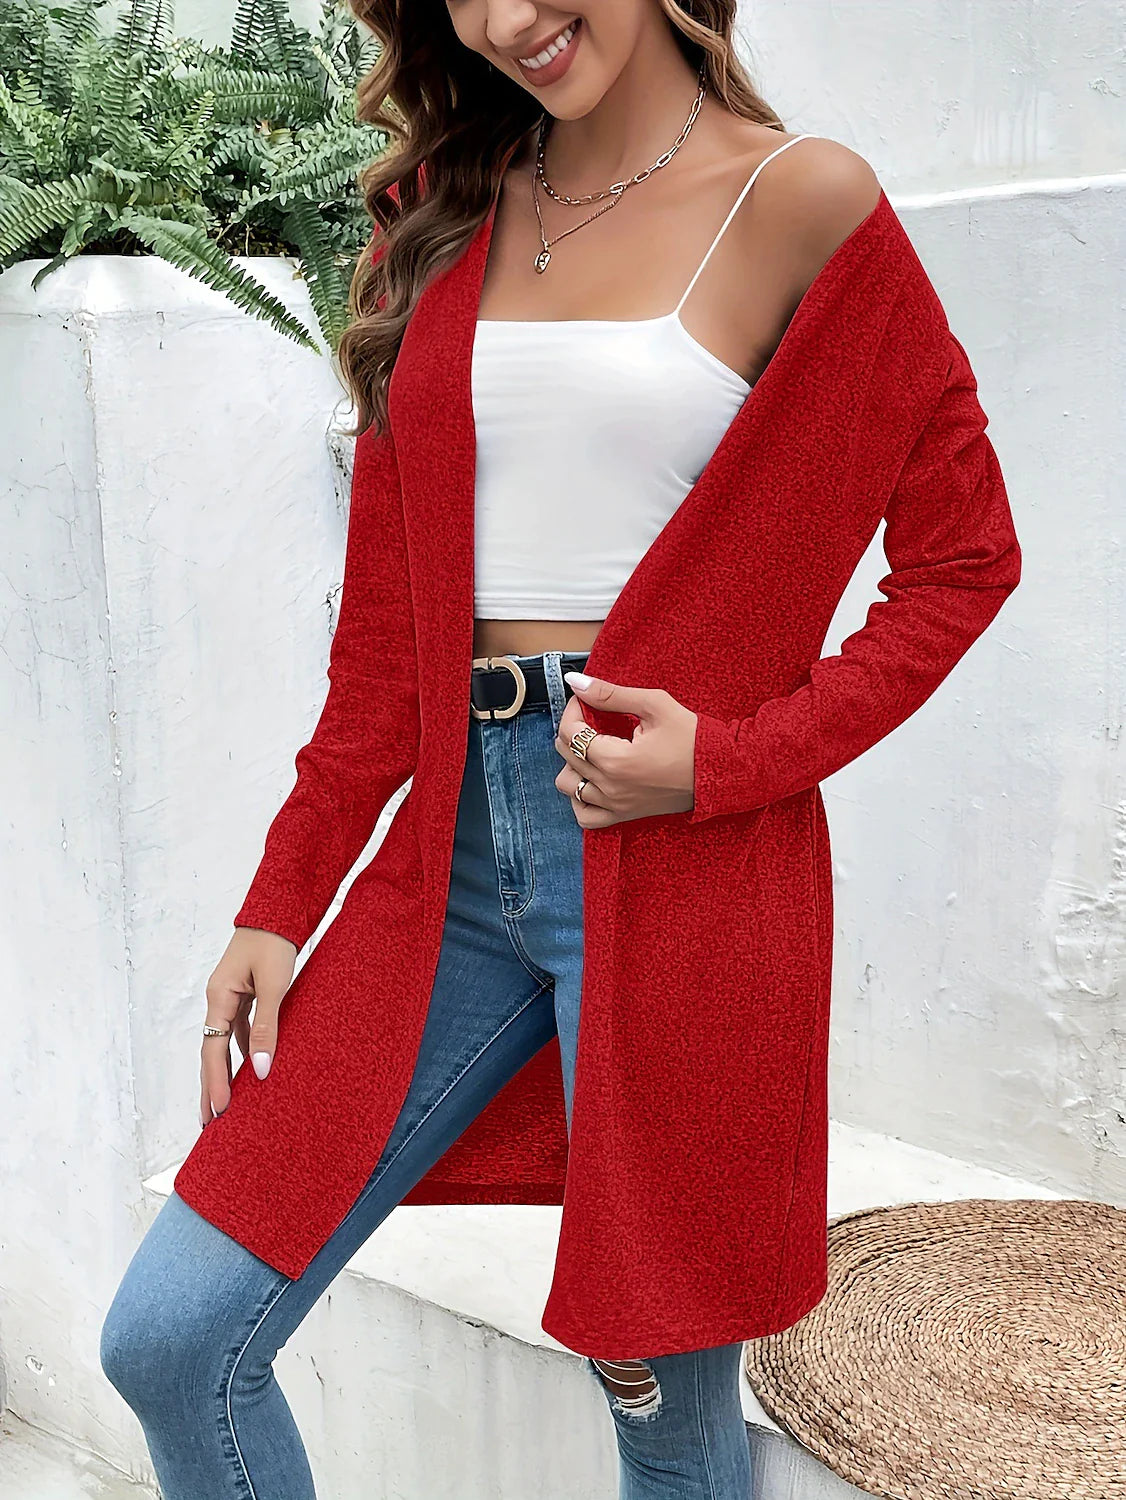 Women's Coat Windproof Warm Outdoor Street Daily Wear Going out Oversized Cardigan Collarless Fashion Daily Modern Street Style Solid Color Regular Fit Outerwear Long Sleeve Fall Winter Red S M L XL